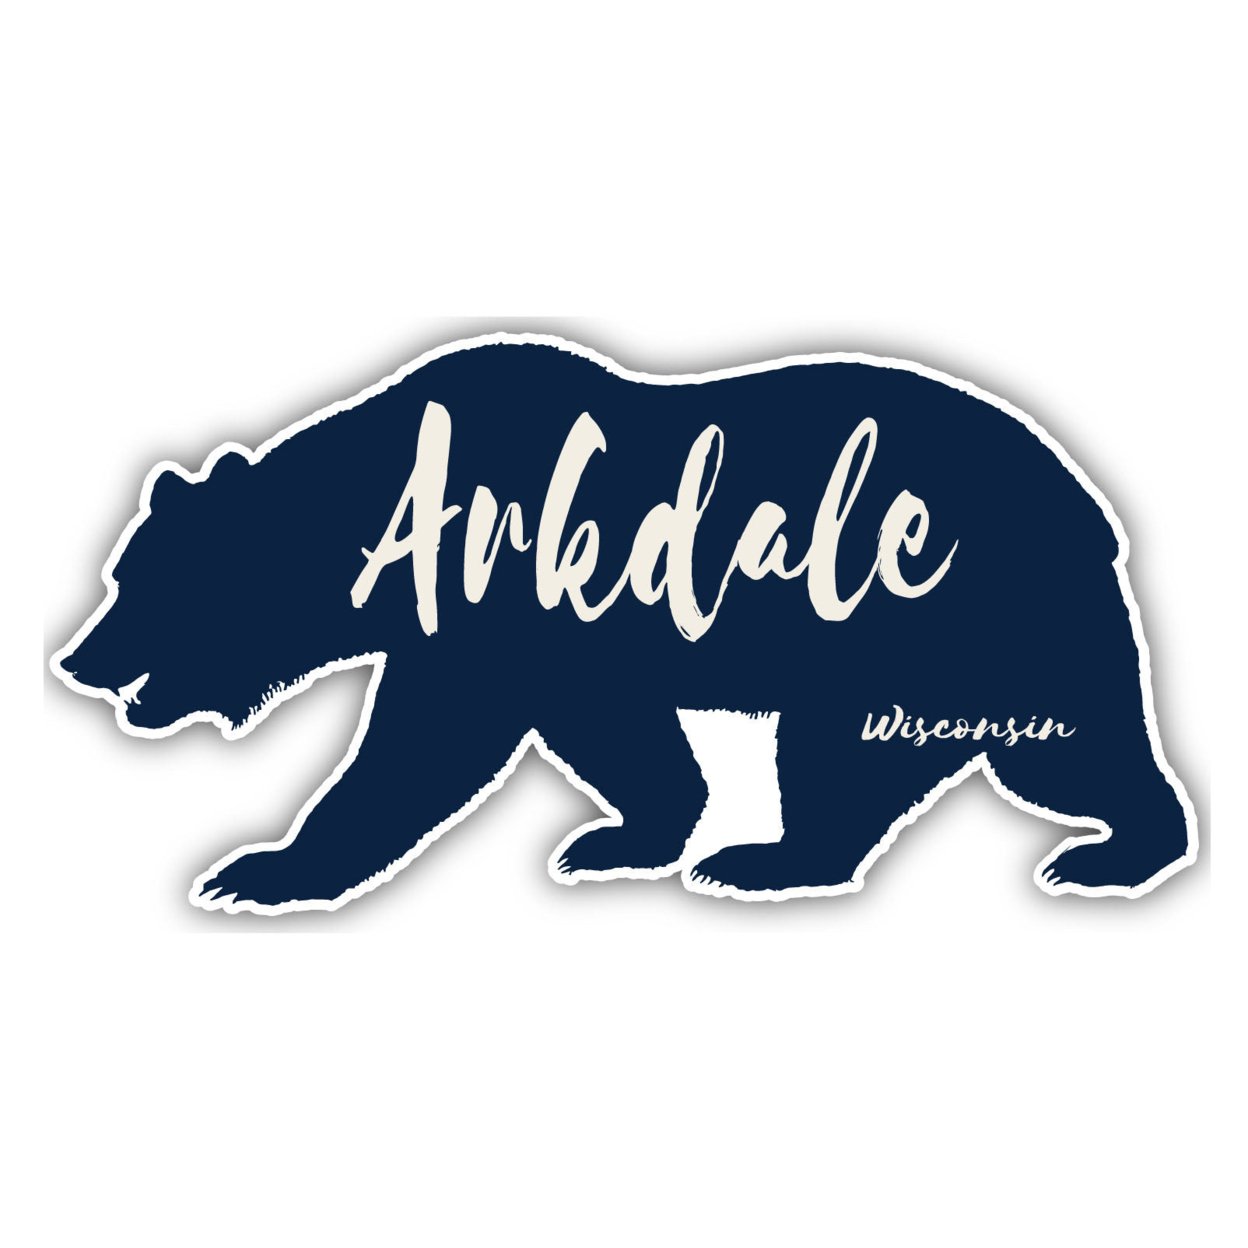 Arkdale Wisconsin Souvenir Decorative Stickers (Choose Theme And Size) - 4-Pack, 2-Inch, Bear